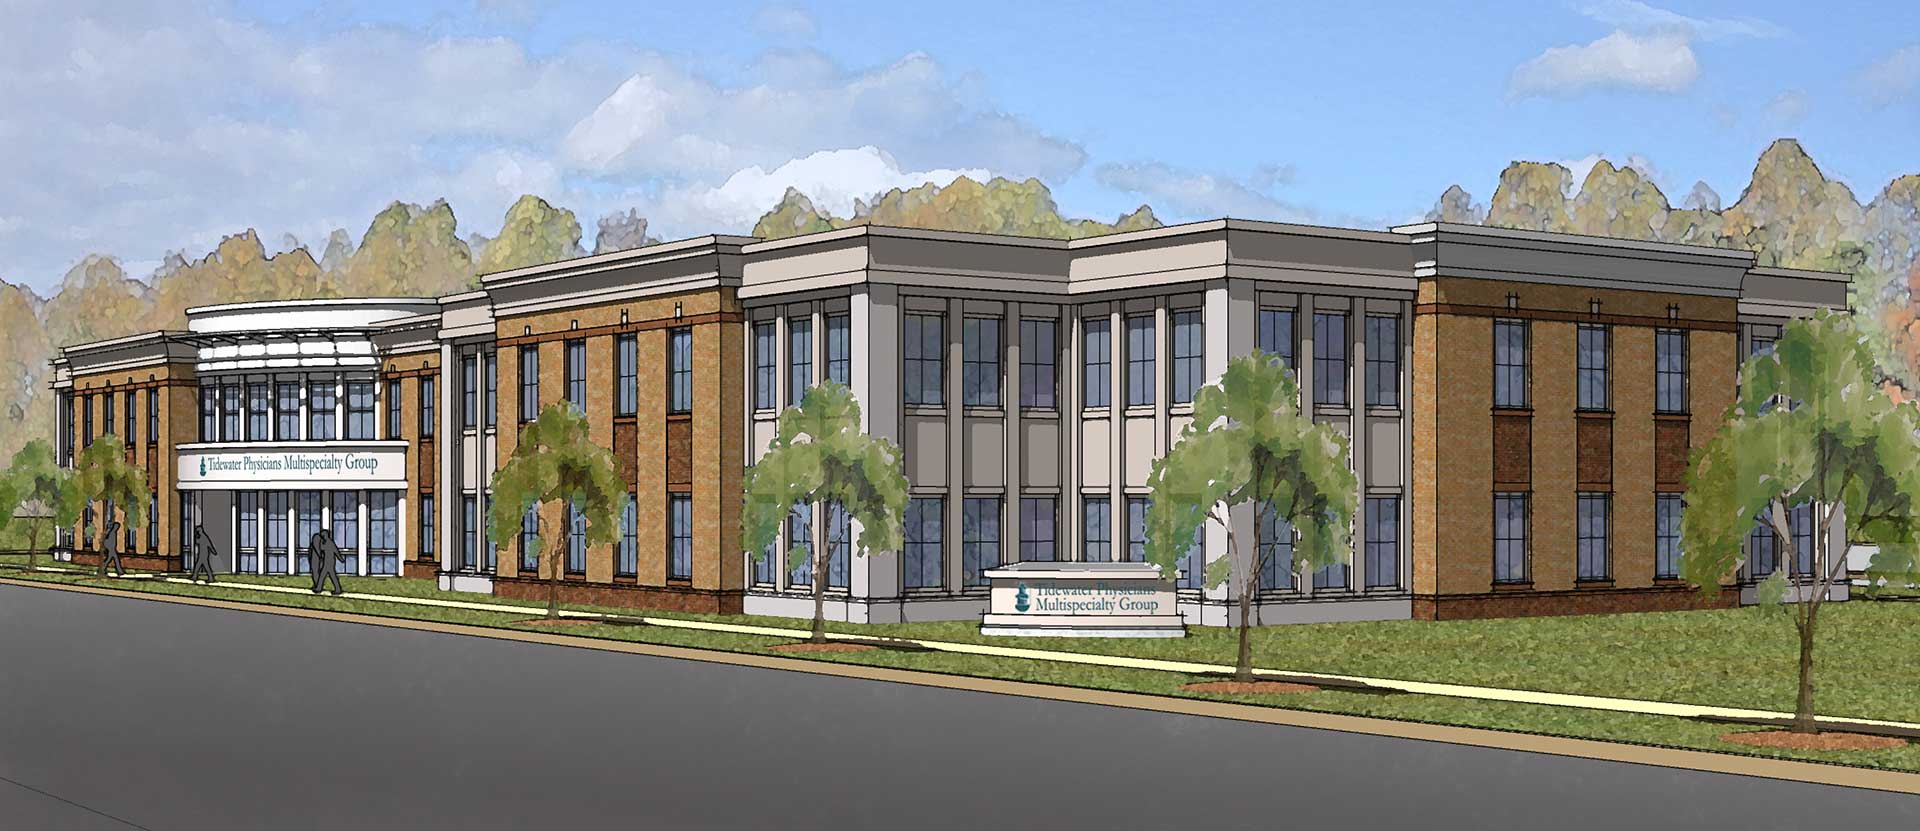 Tidewater Physicians Multispecialty Group Medical Office Building rendering